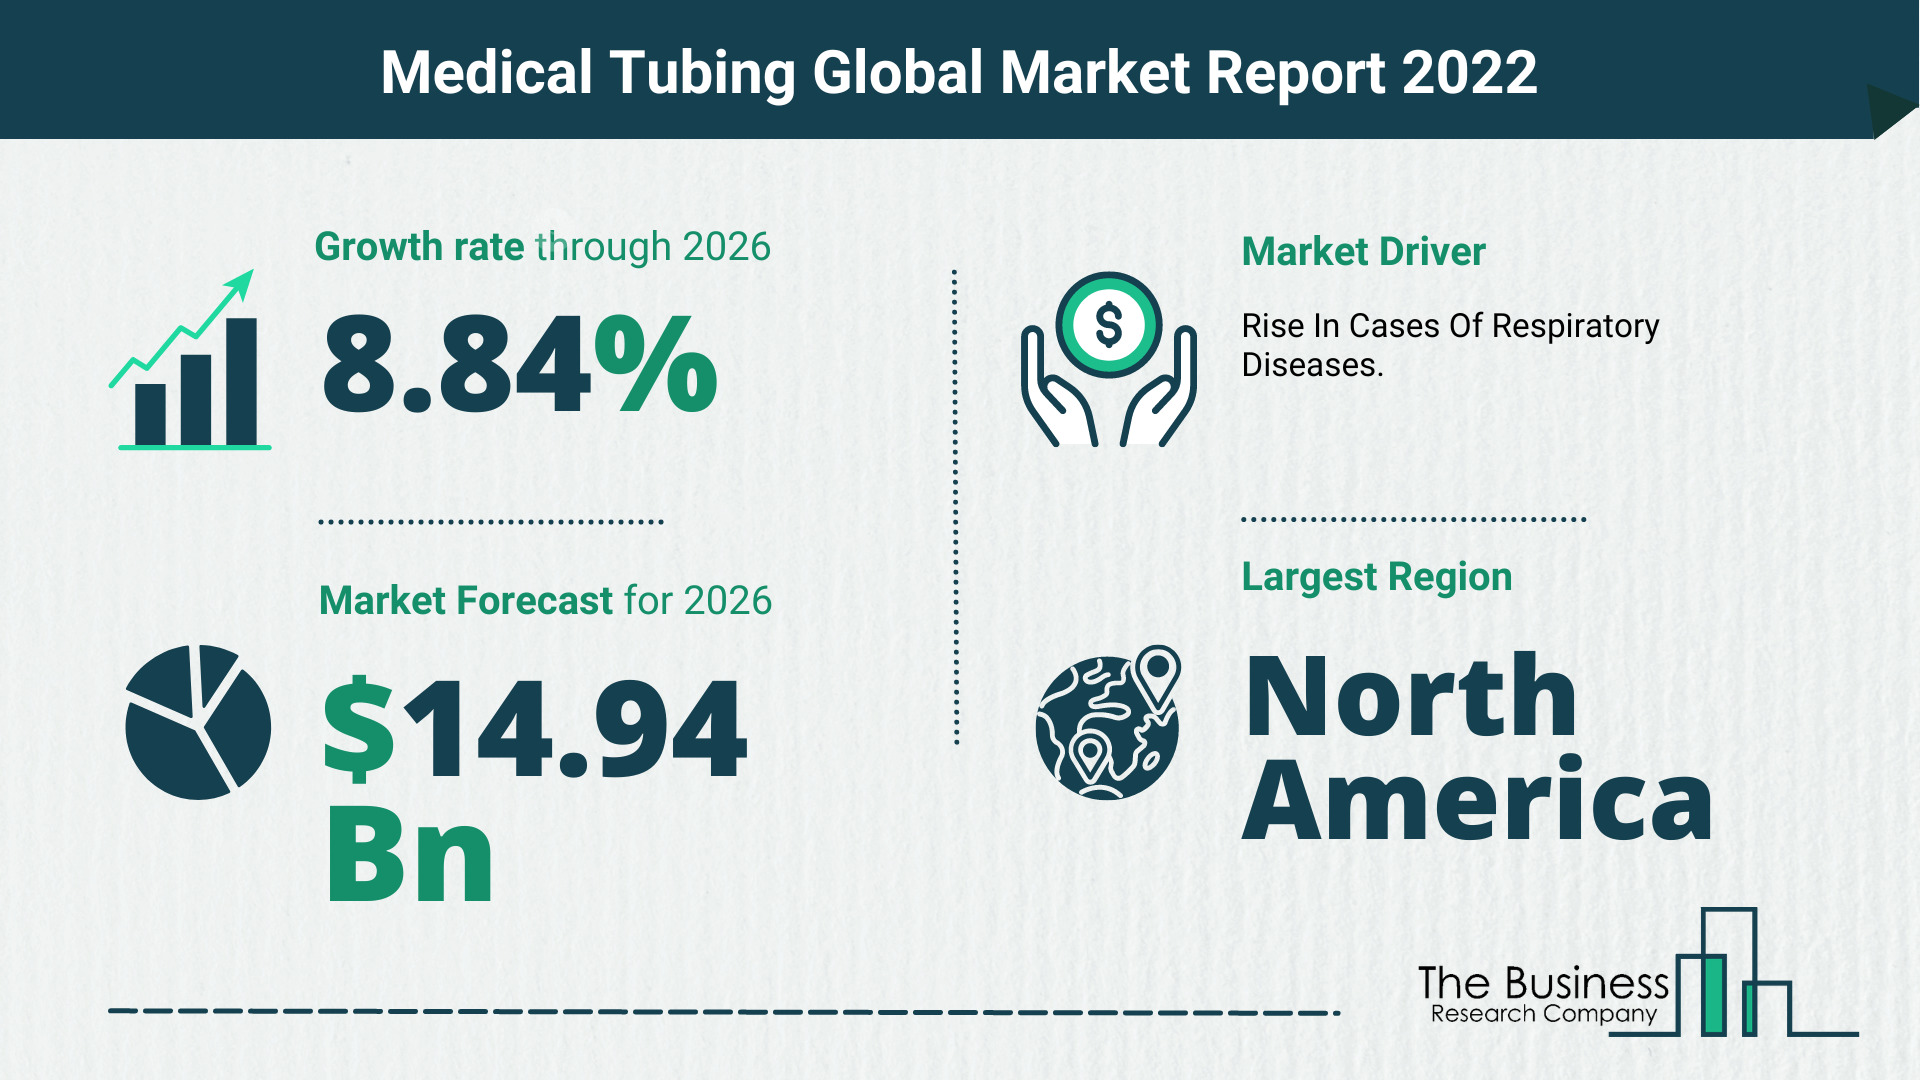 How Will The Medical Tubing Market Grow In 2022?